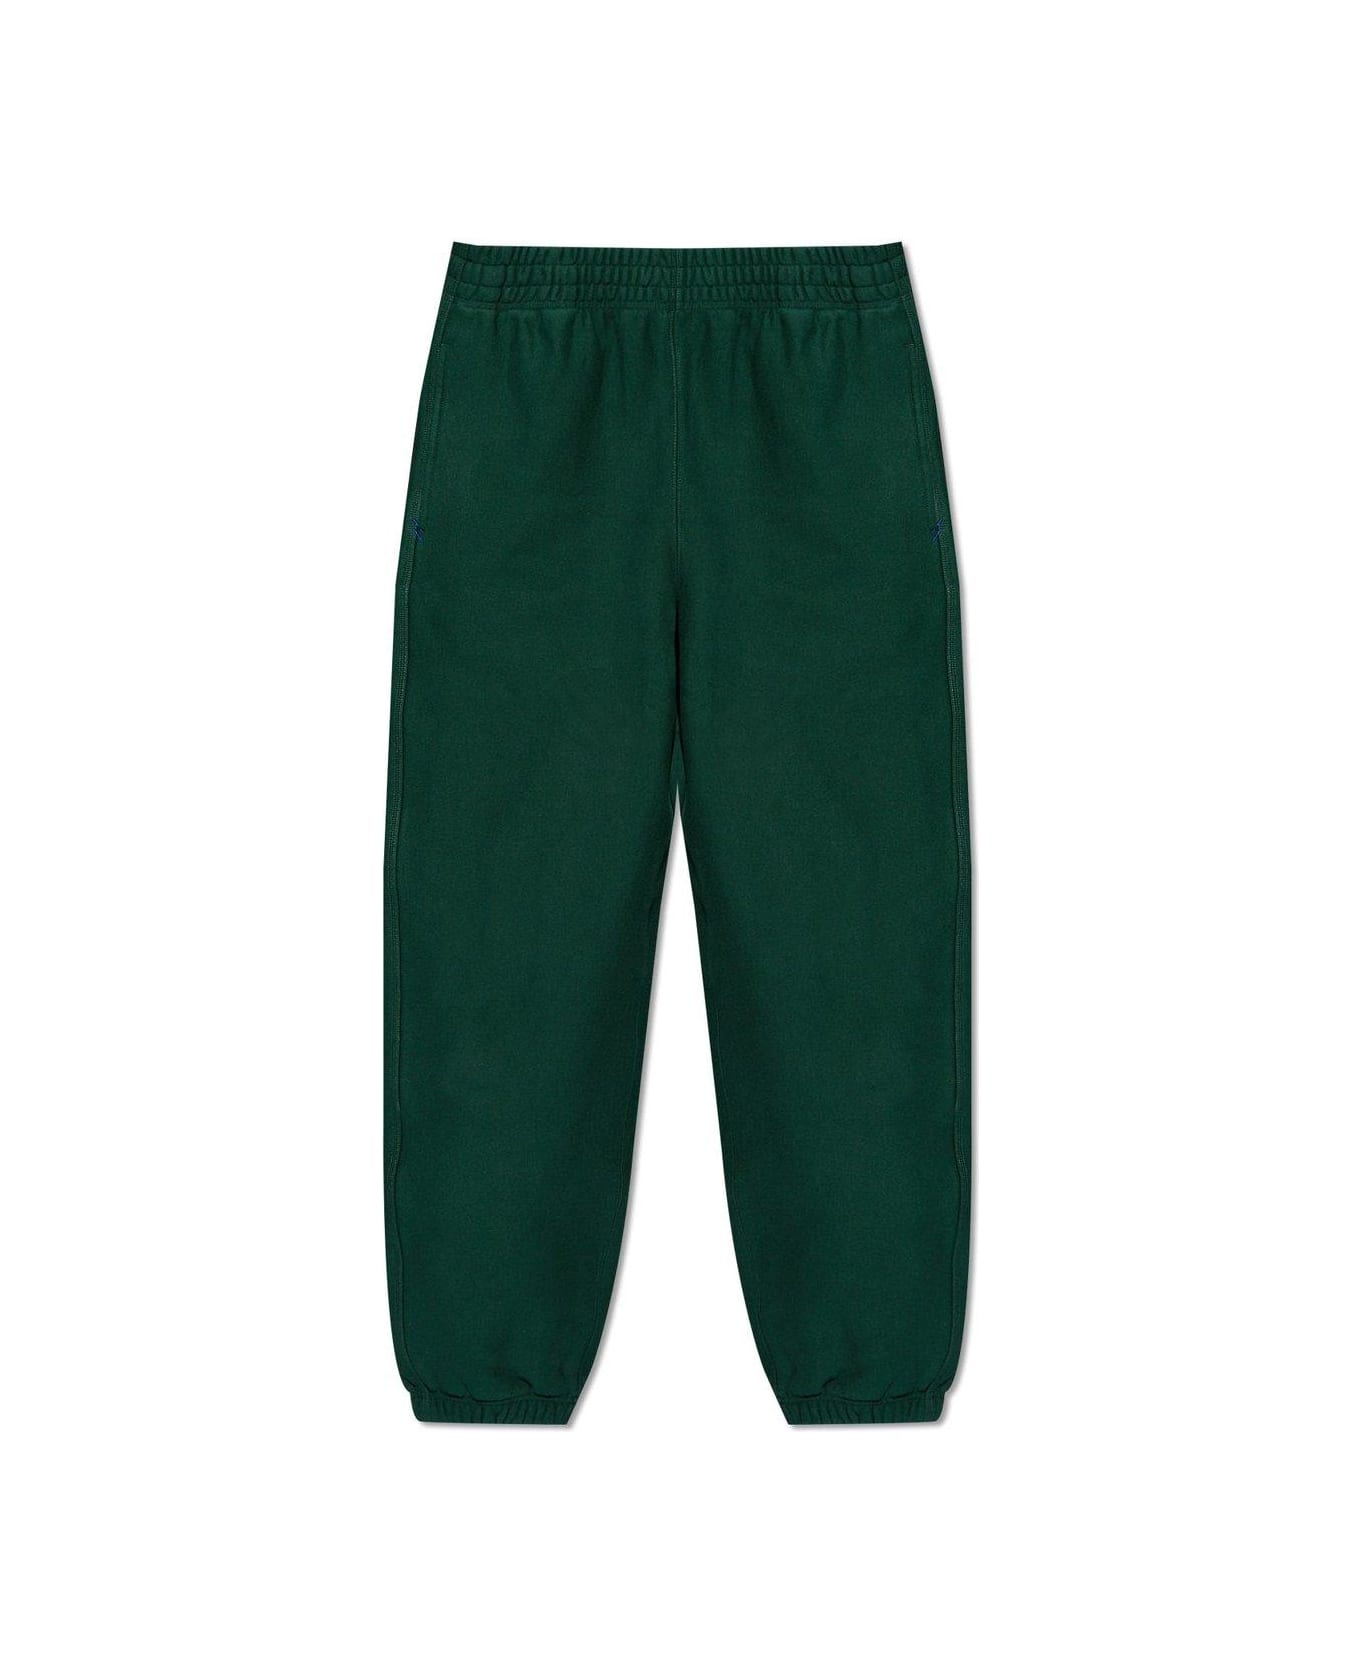 Burberry Equestrian Knight Patch Track Pants - Ivy